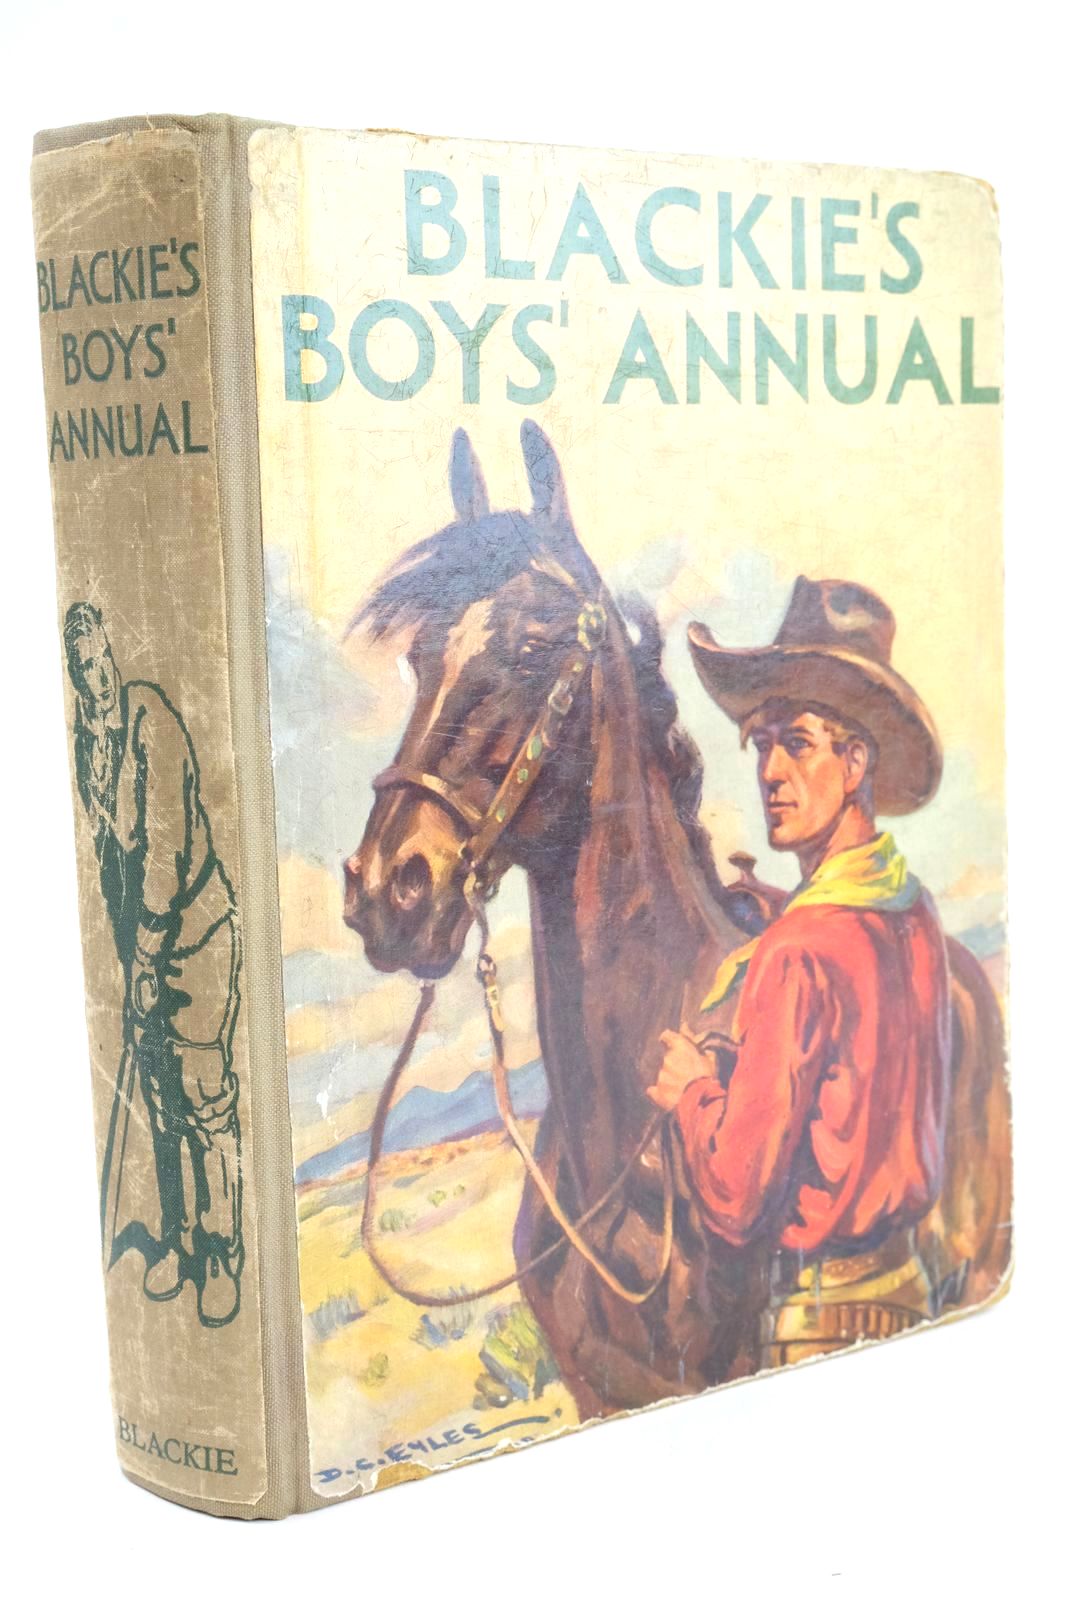 Photo of BLACKIE'S BOYS' ANNUAL written by Ryland, Clive Westerman, Percy F. et al, illustrated by Eyles, D.C. et al., published by Blackie &amp; Son Ltd. (STOCK CODE: 1324780)  for sale by Stella & Rose's Books